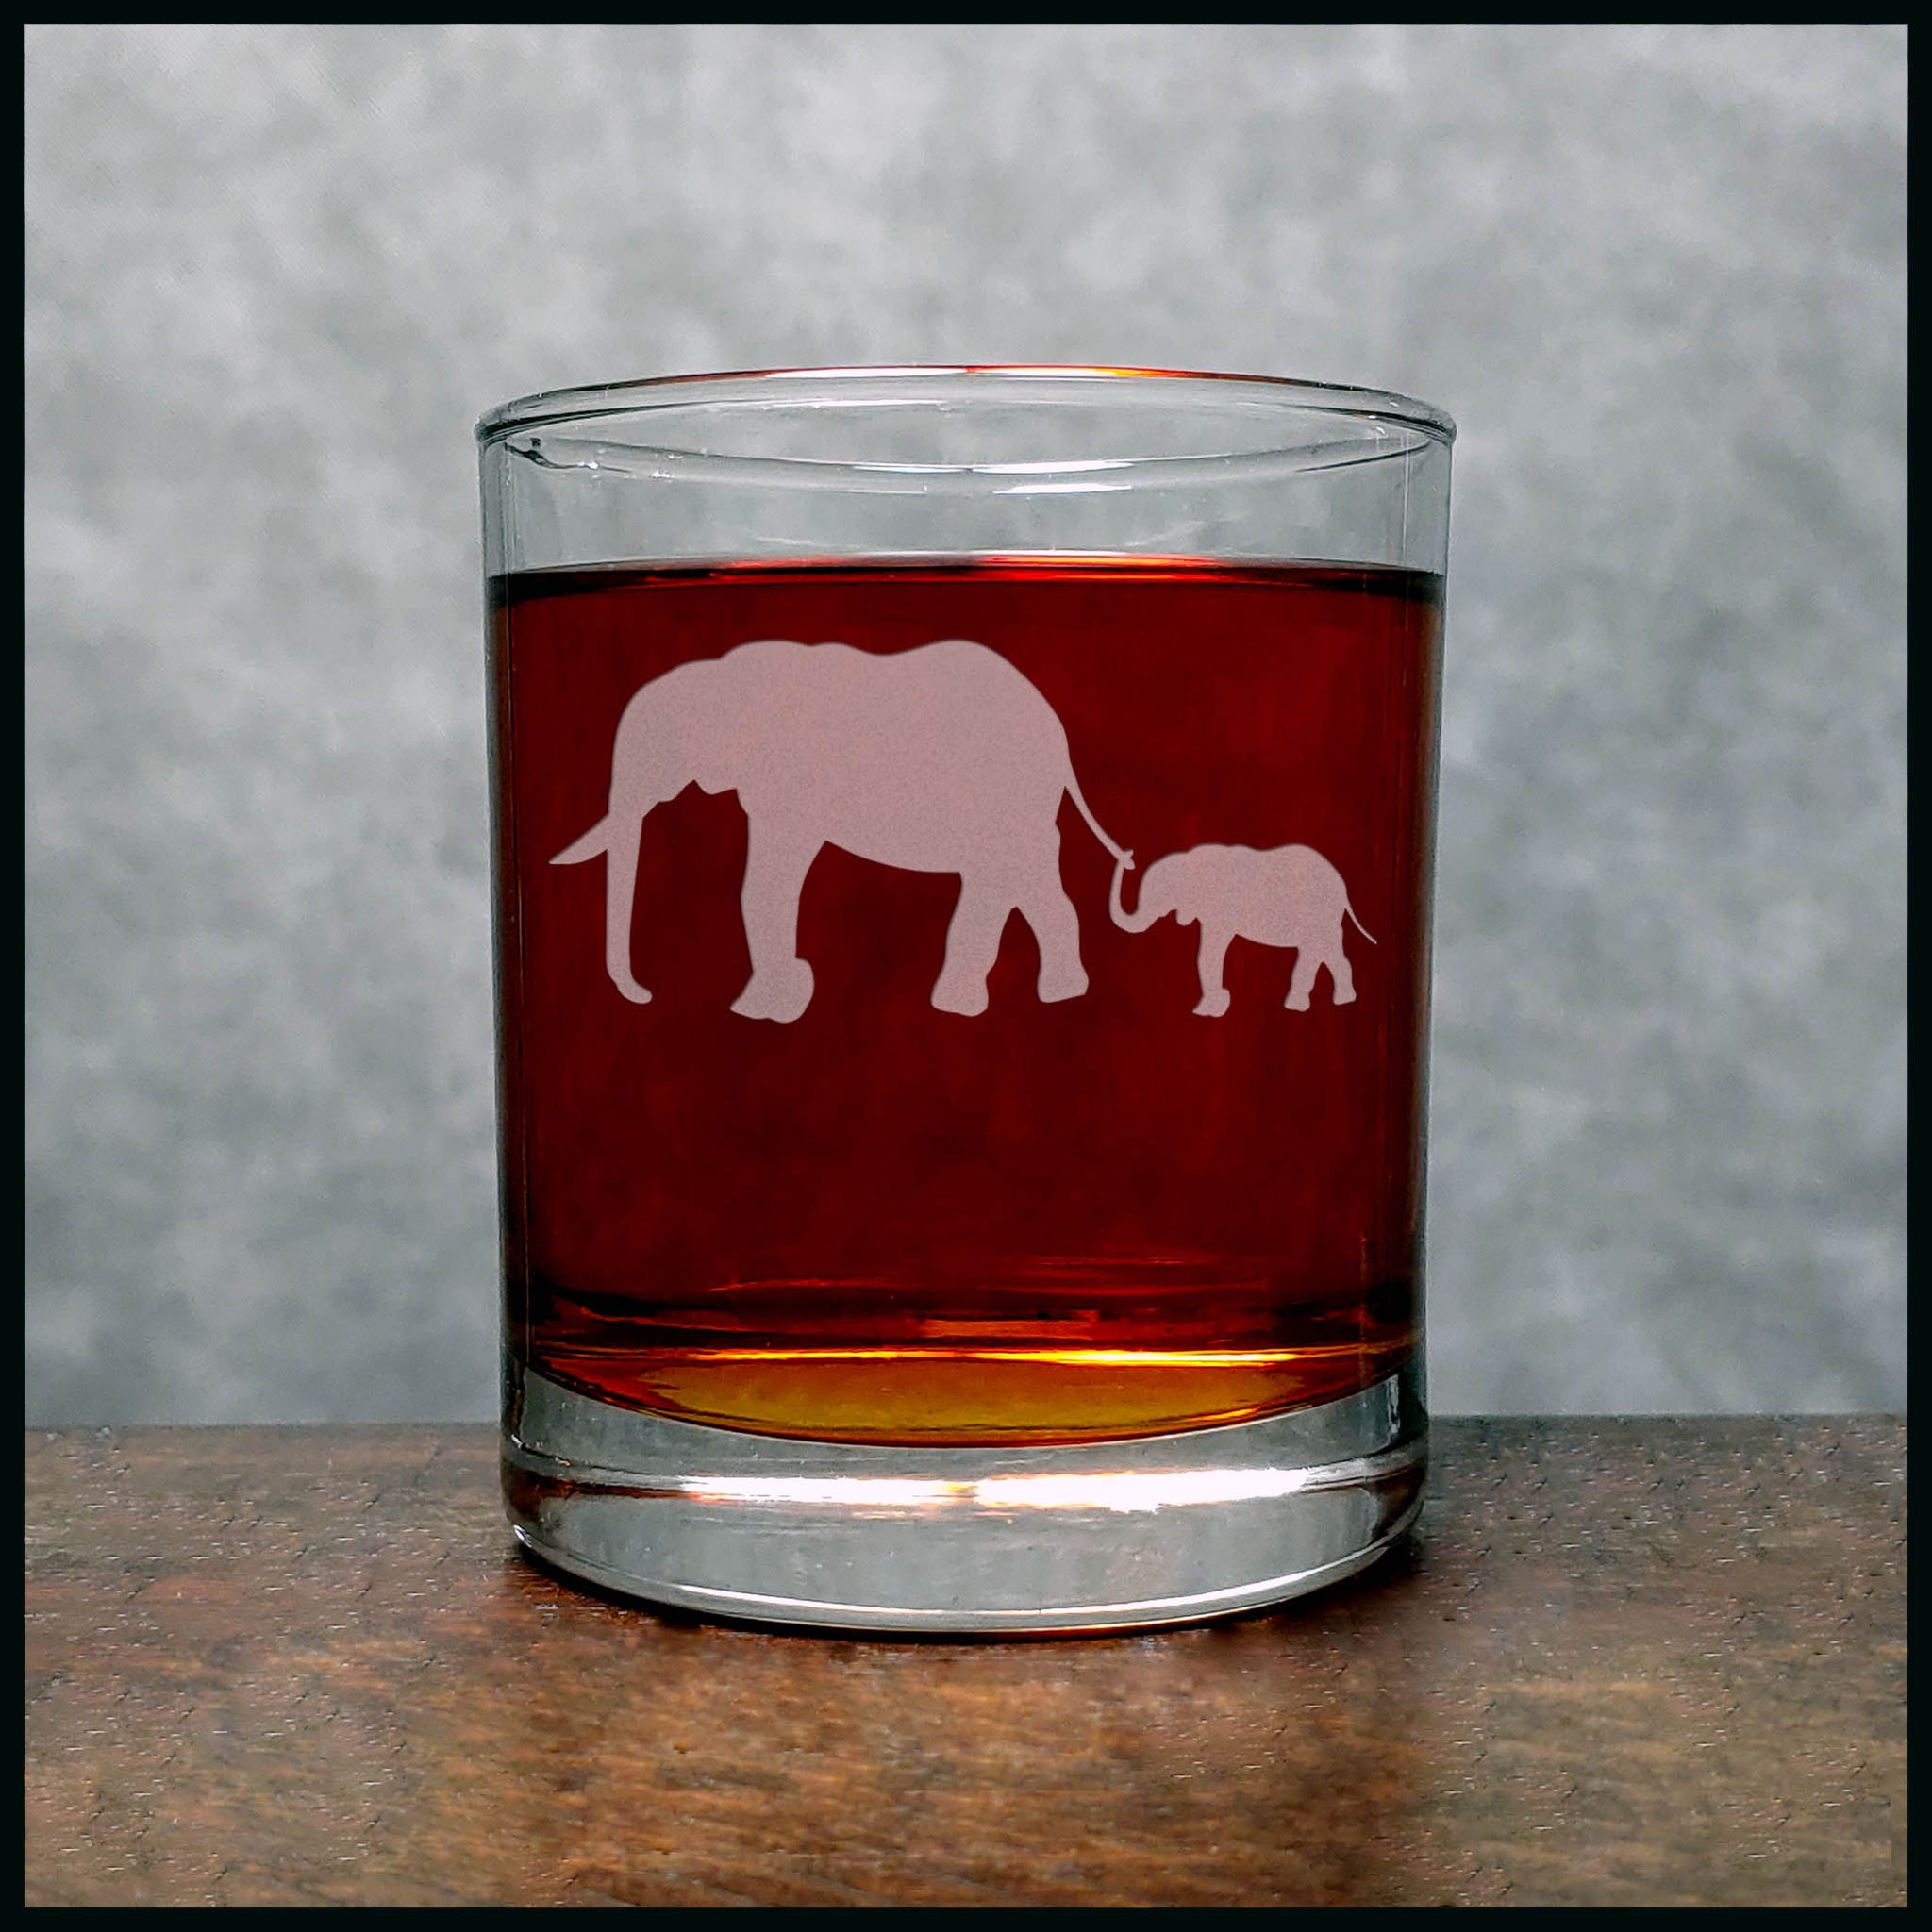 Elephant and Baby Whisky Glass - Copyright Hues in Glass